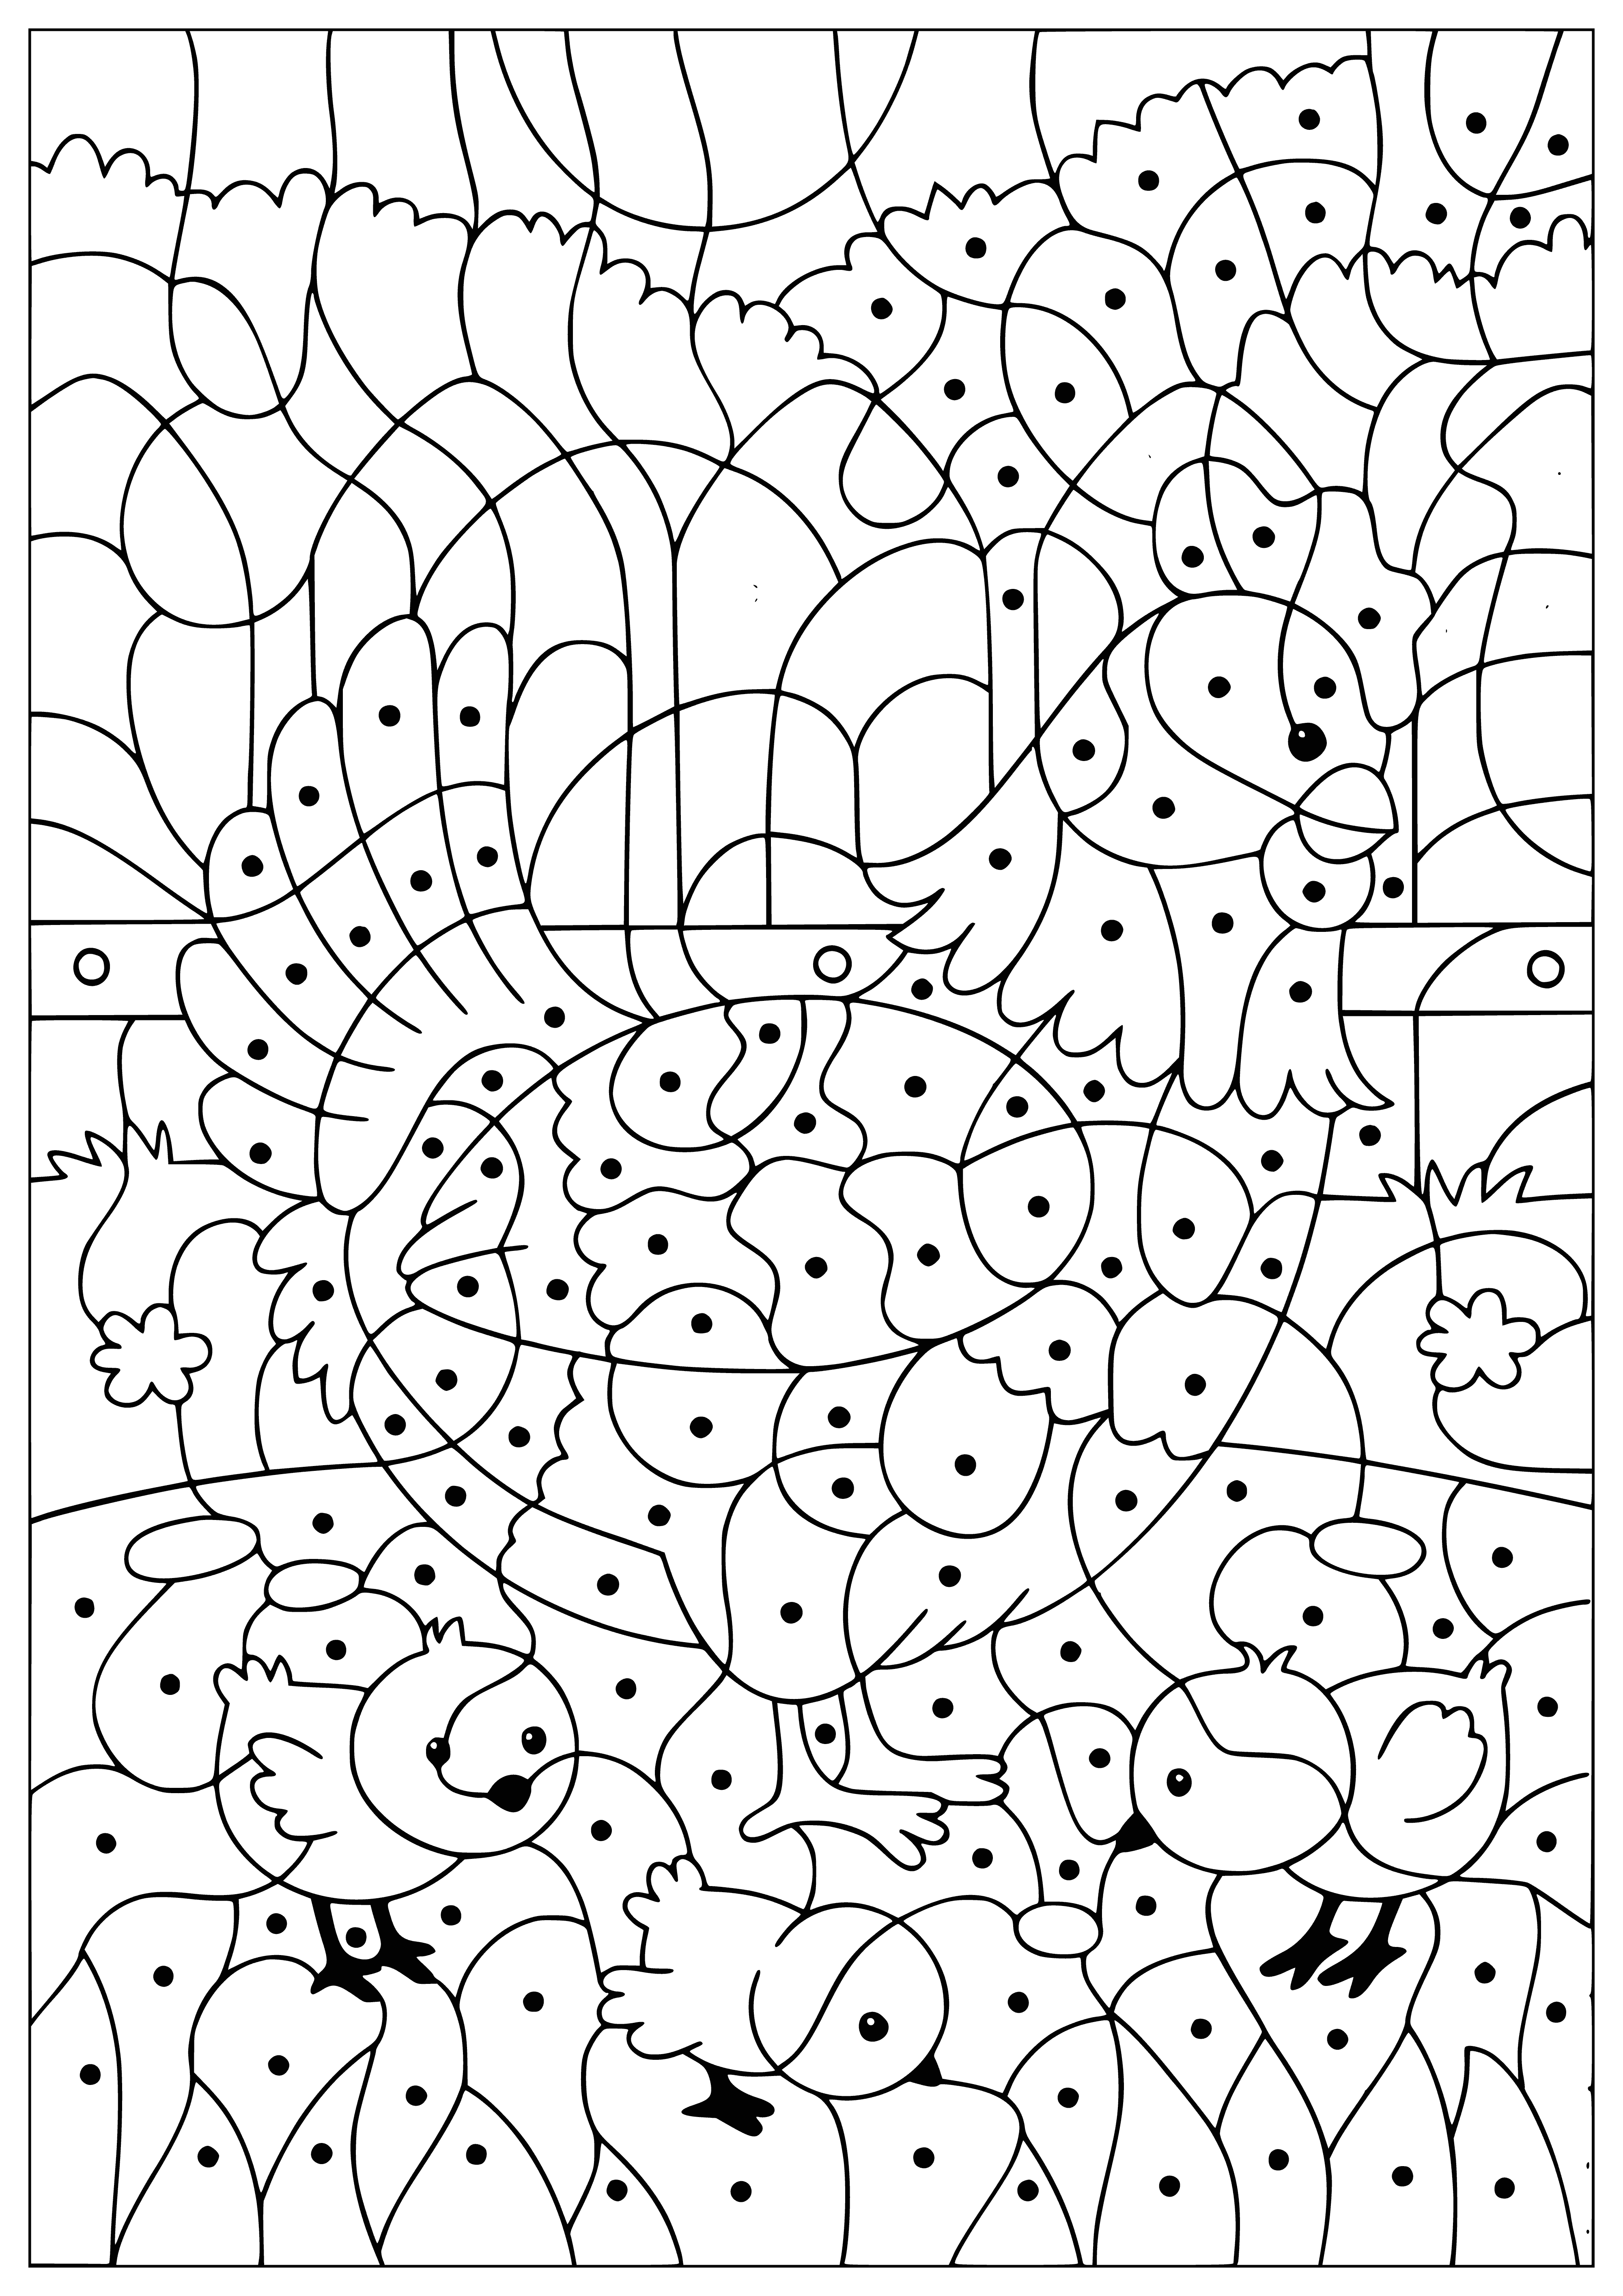 Chicken with chicks coloring page